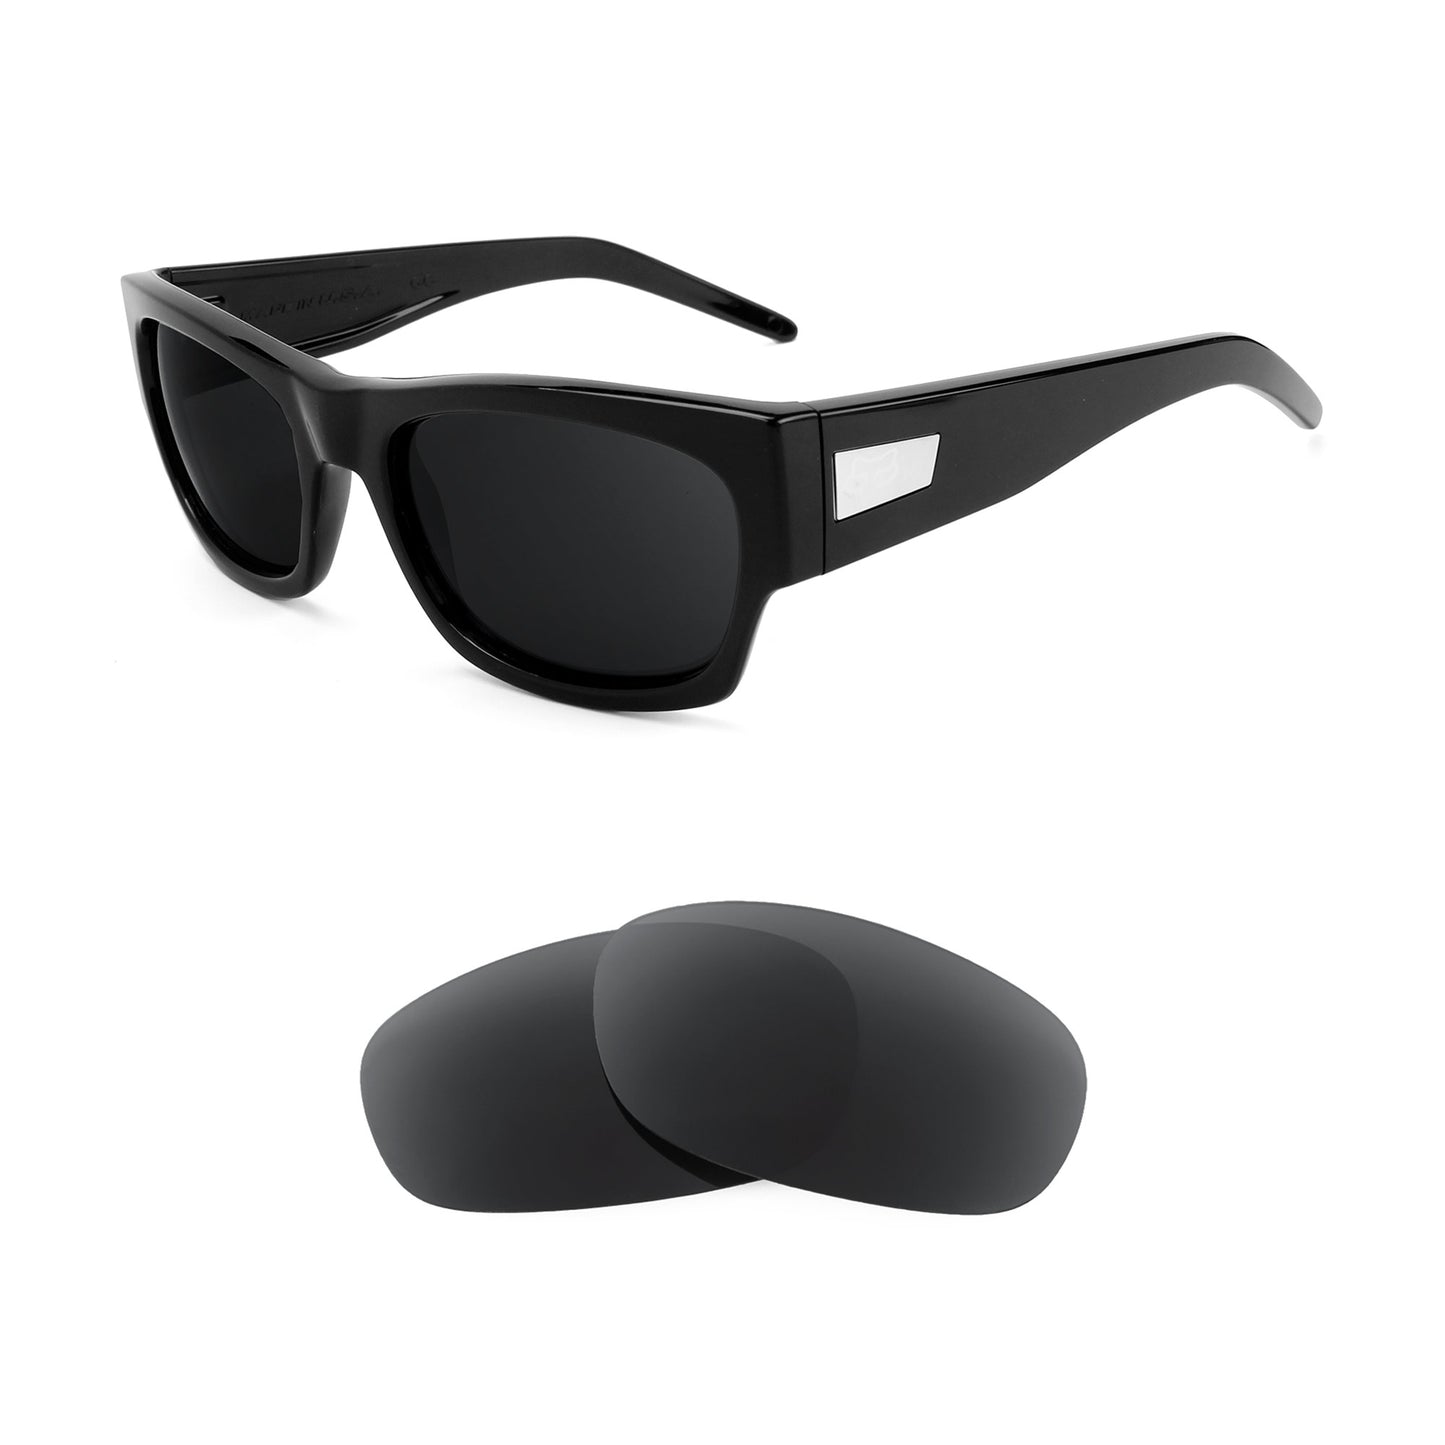 Fox Racing The Heretic sunglasses with replacement lenses